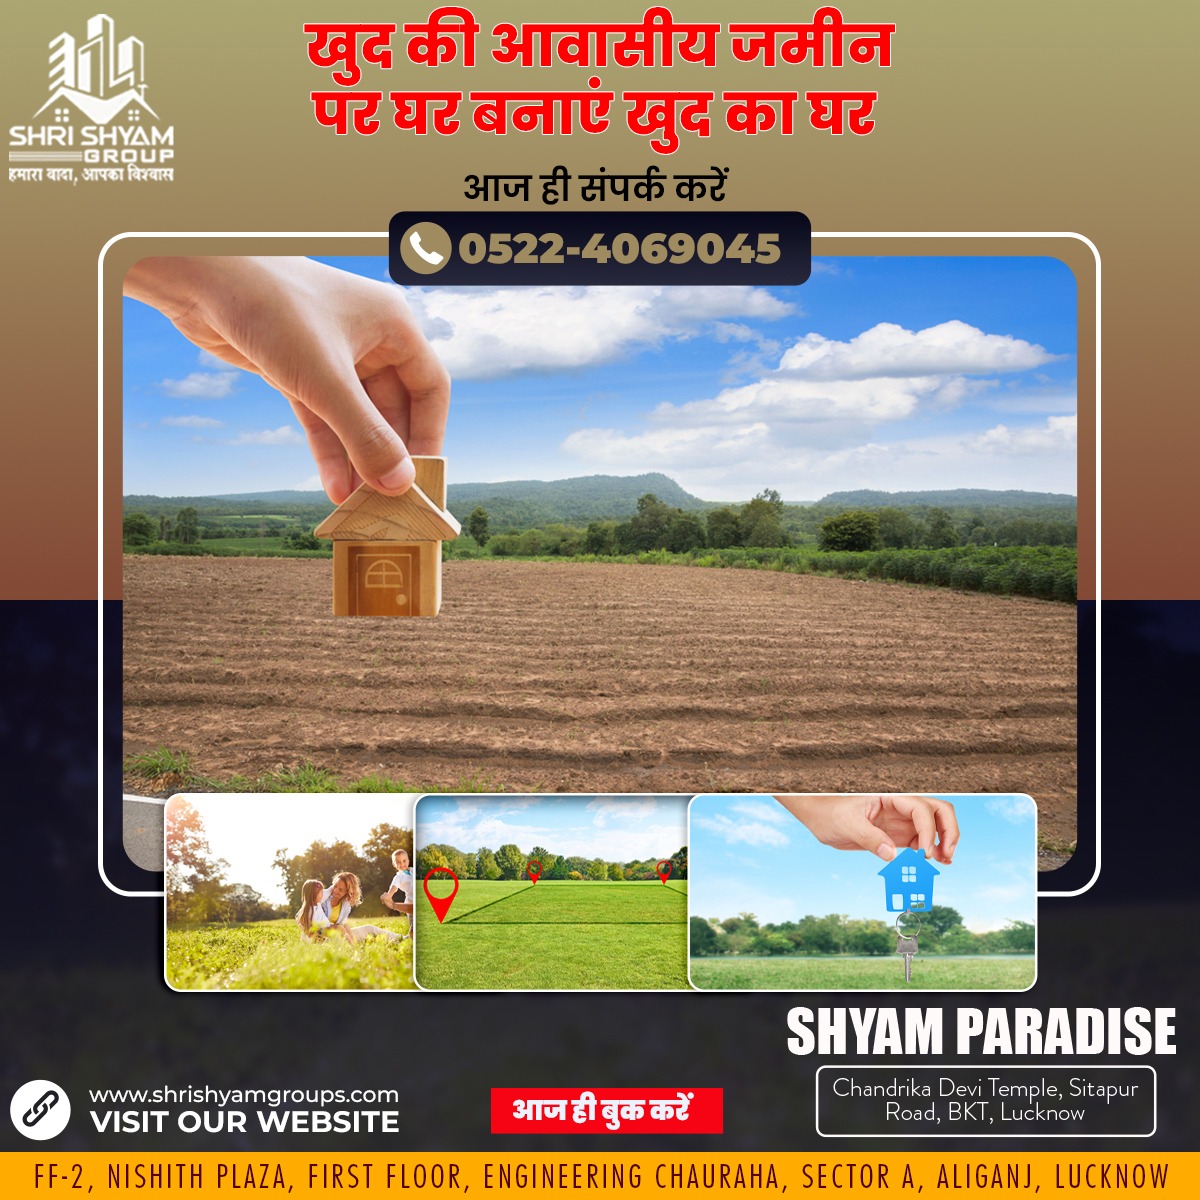 Buy residential plots in well-developed Shyam Paradise. We have developed it with modern amenities.
📷Call: +91 9580039770
📷Web: shrishyamgroups.com
#plotforsale #plotsavailable #plotsale #plotsforsale #realestateforsale #realestateinvesting #realestateinvestor